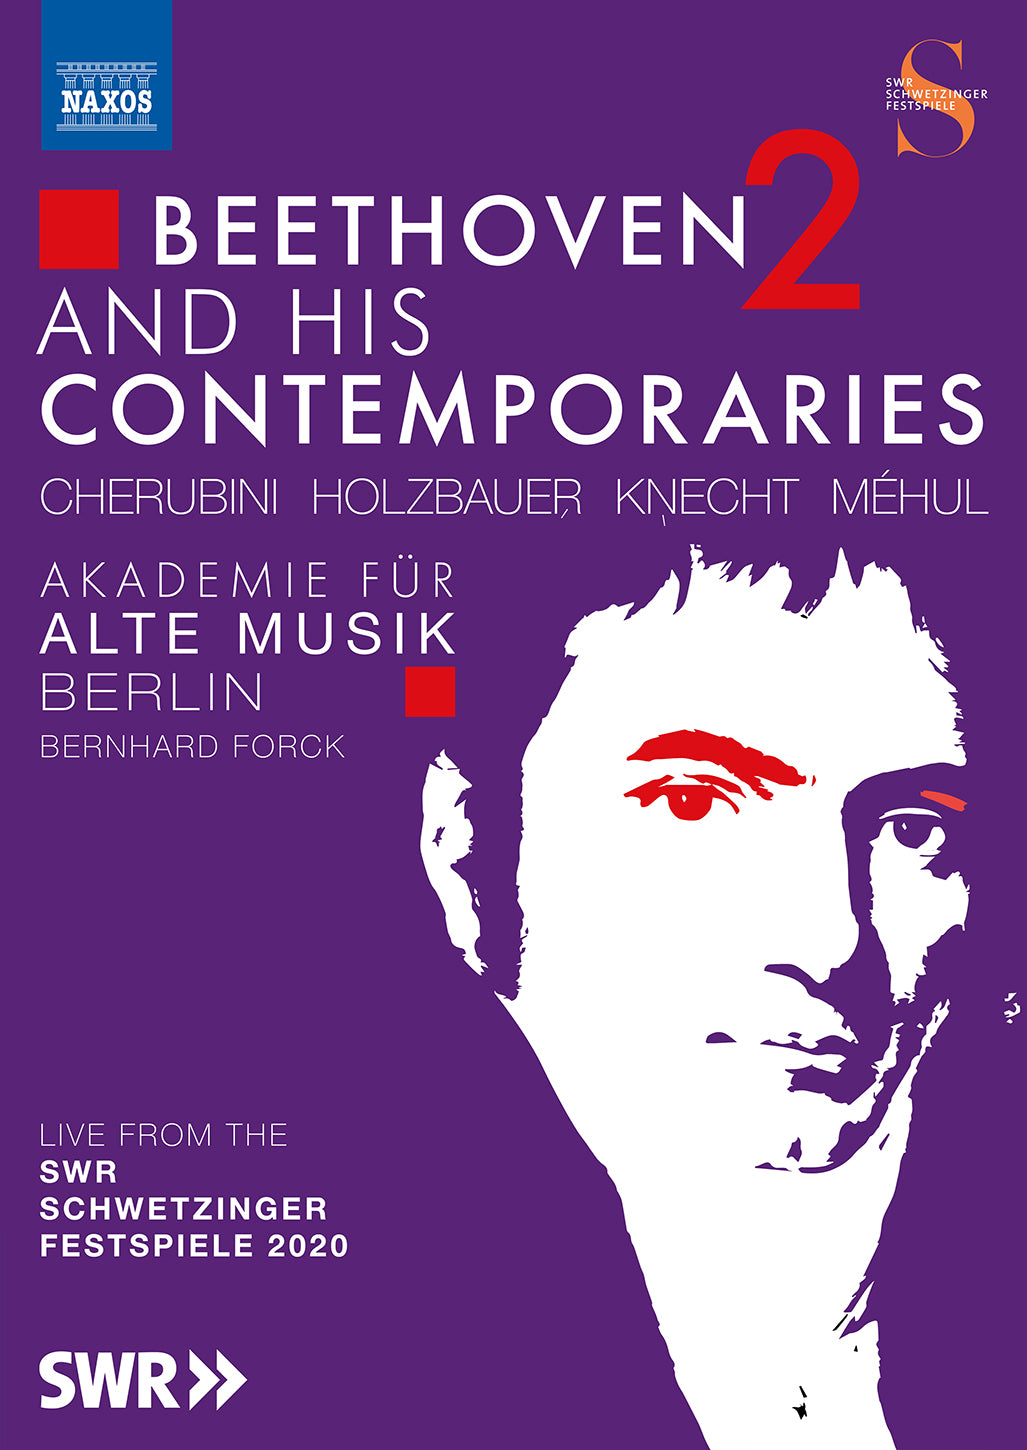 Beethoven and His Contemporaries, Vol. 2 / Forck, Akademie für Alte Musik Berlin [DVD]